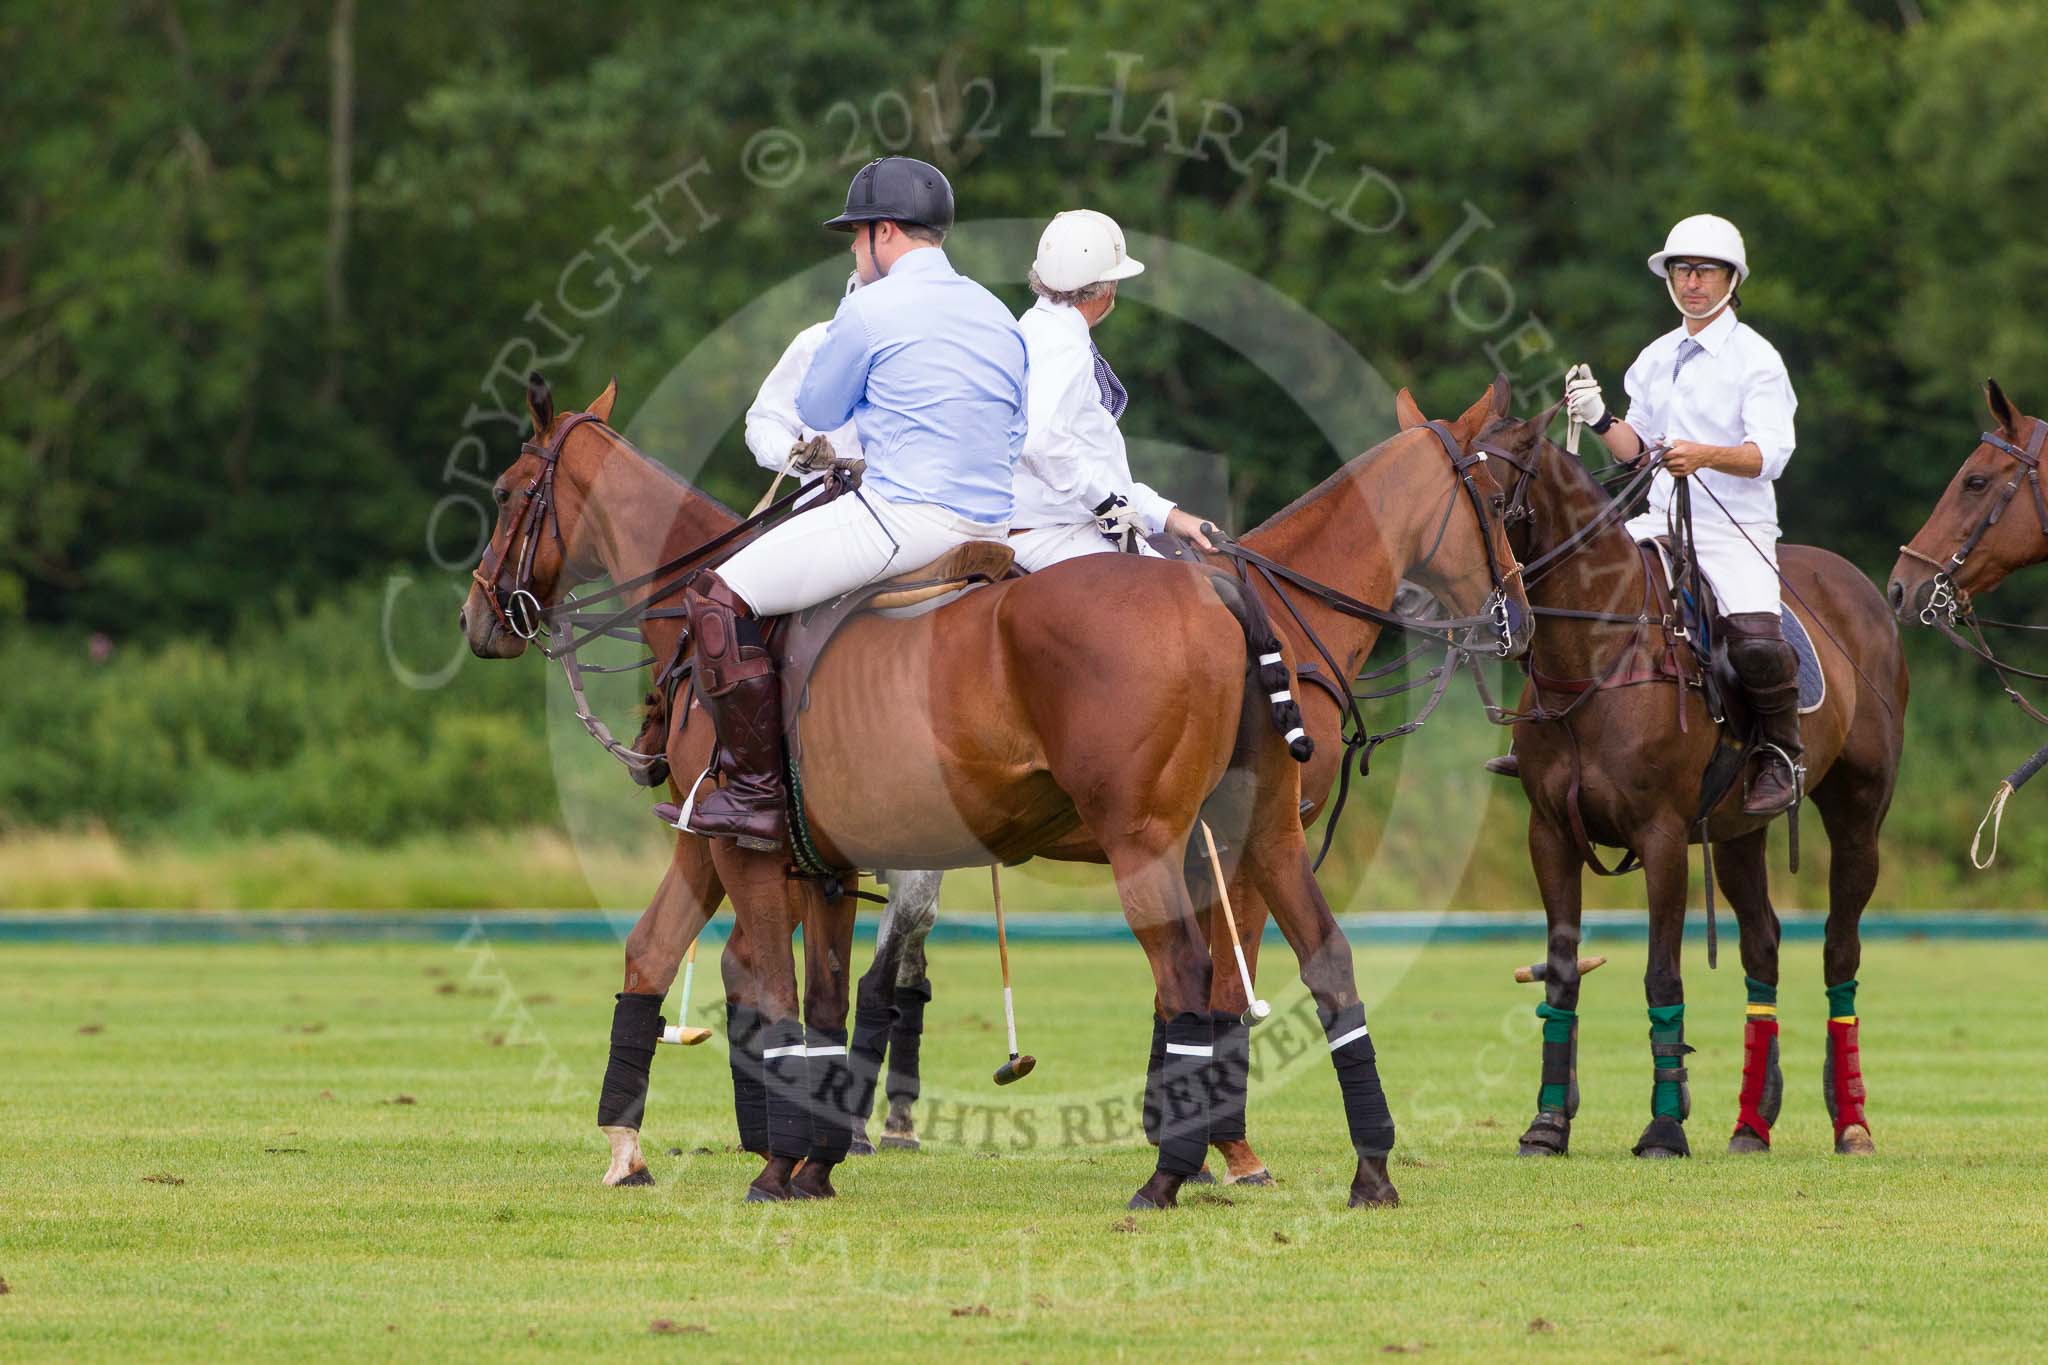 7th Heritage Polo Cup semi-finals: Pepe Riglos La Golondrina Argentina in the background..
Hurtwood Park Polo Club,
Ewhurst Green,
Surrey,
United Kingdom,
on 04 August 2012 at 15:35, image #255